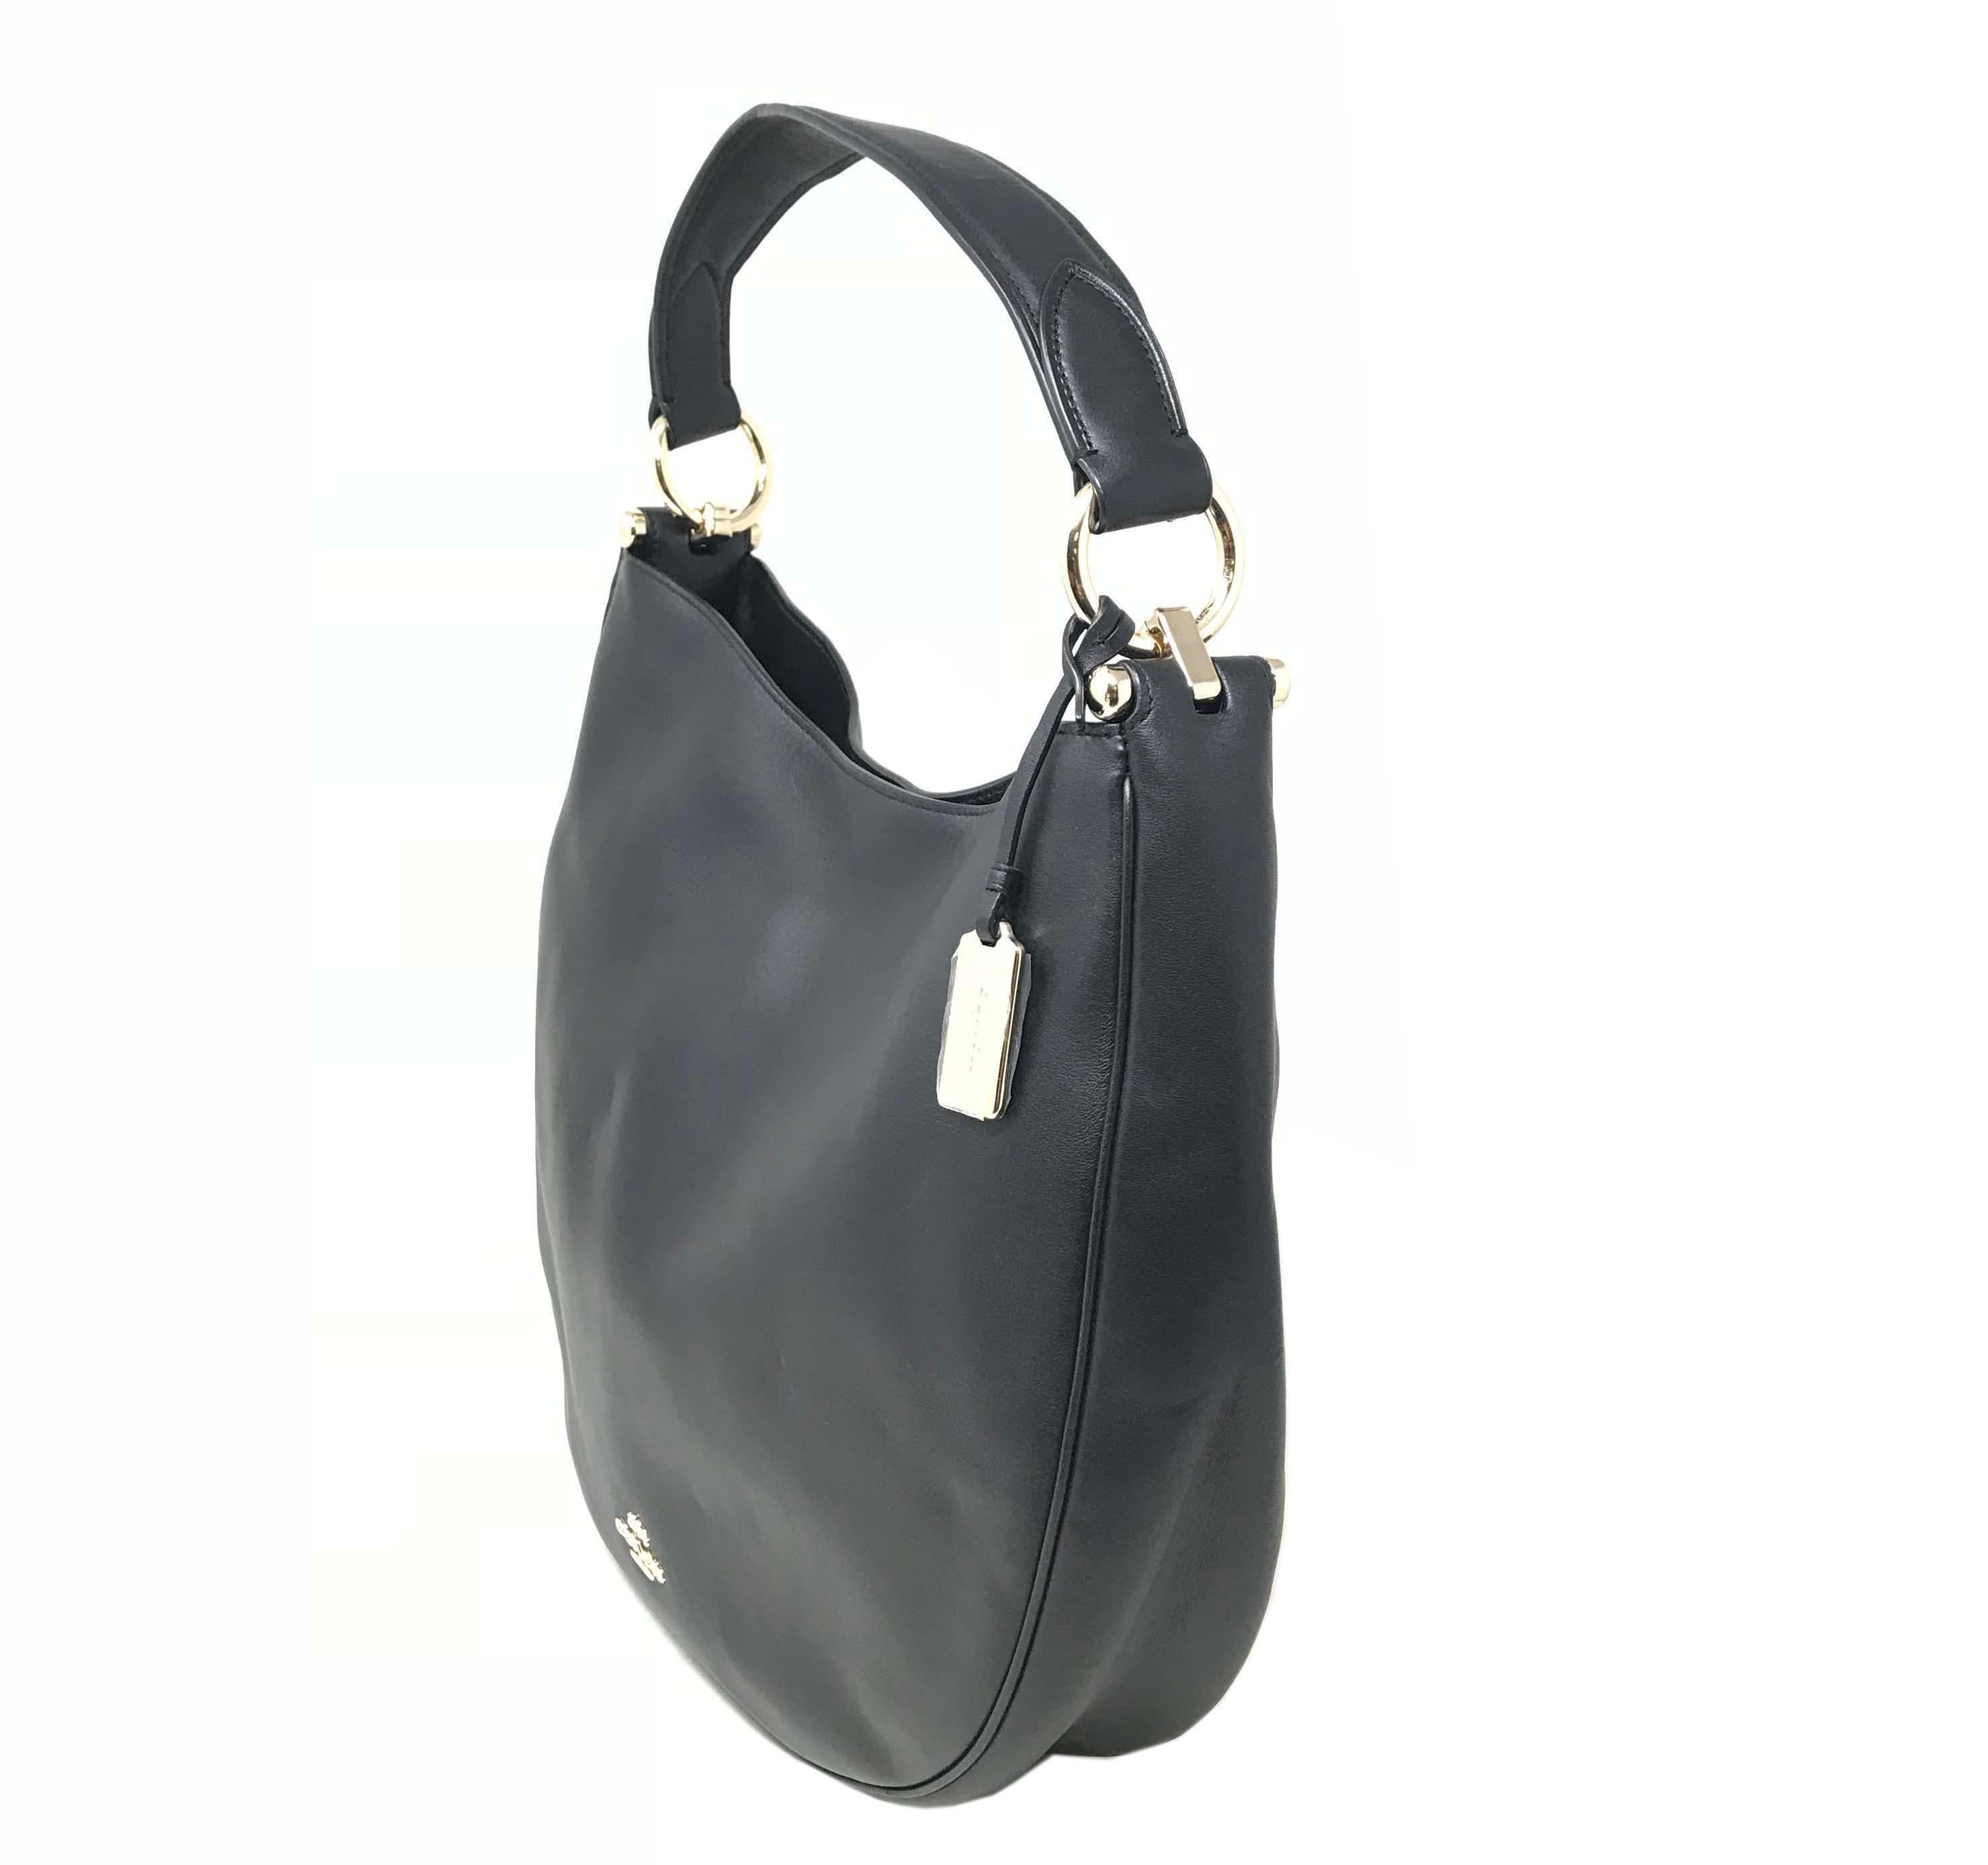 Coach 36026 Leather Nomad Glovetanned Hobo Shoulder Ladies Bag
Length: 14 inches, height 11 inches, depth 3.5 inch, adjustable up to 23inch strap drop. 